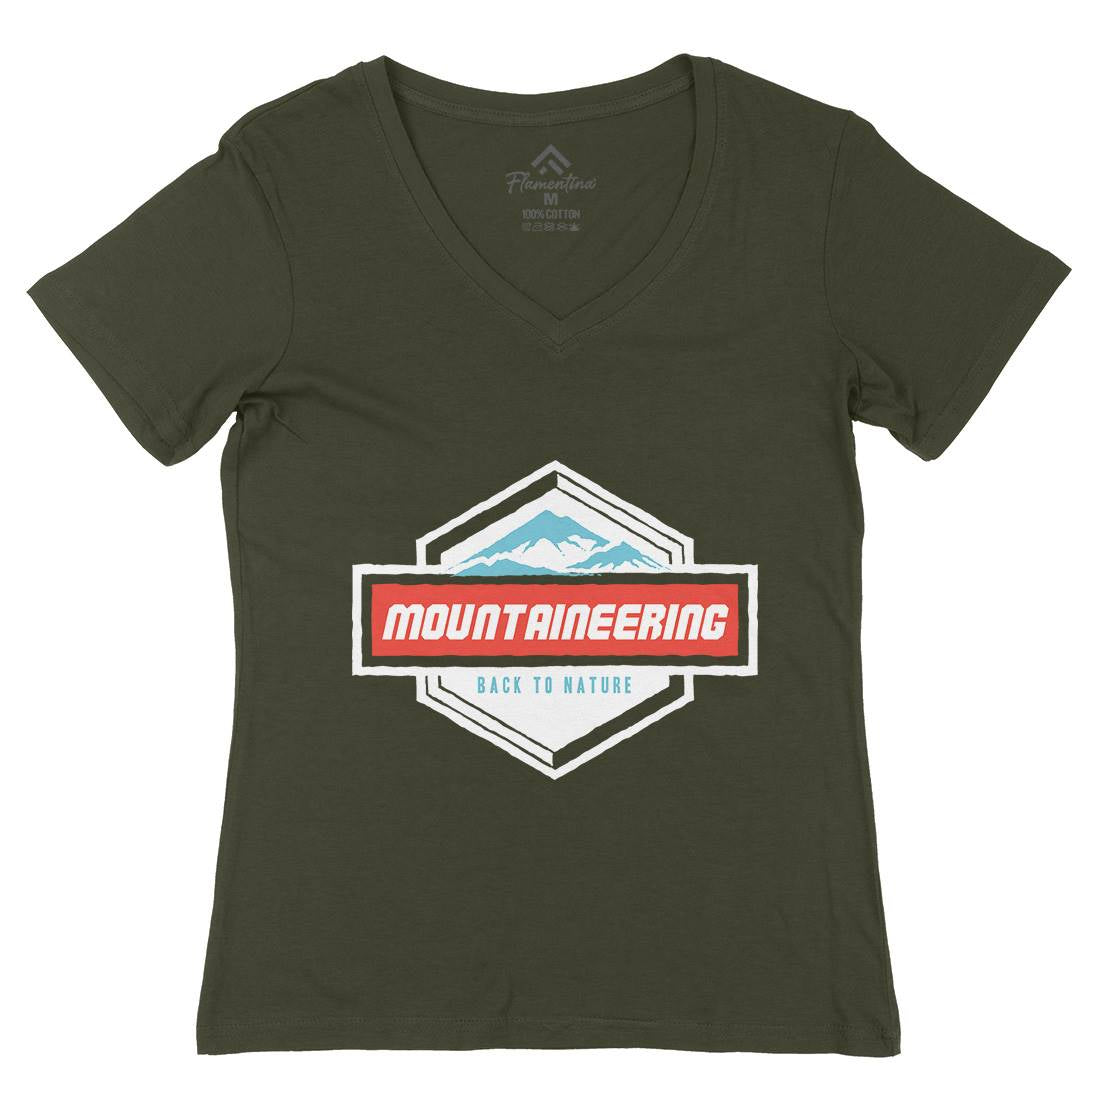 Mountaineering Womens Organic V-Neck T-Shirt Nature A350